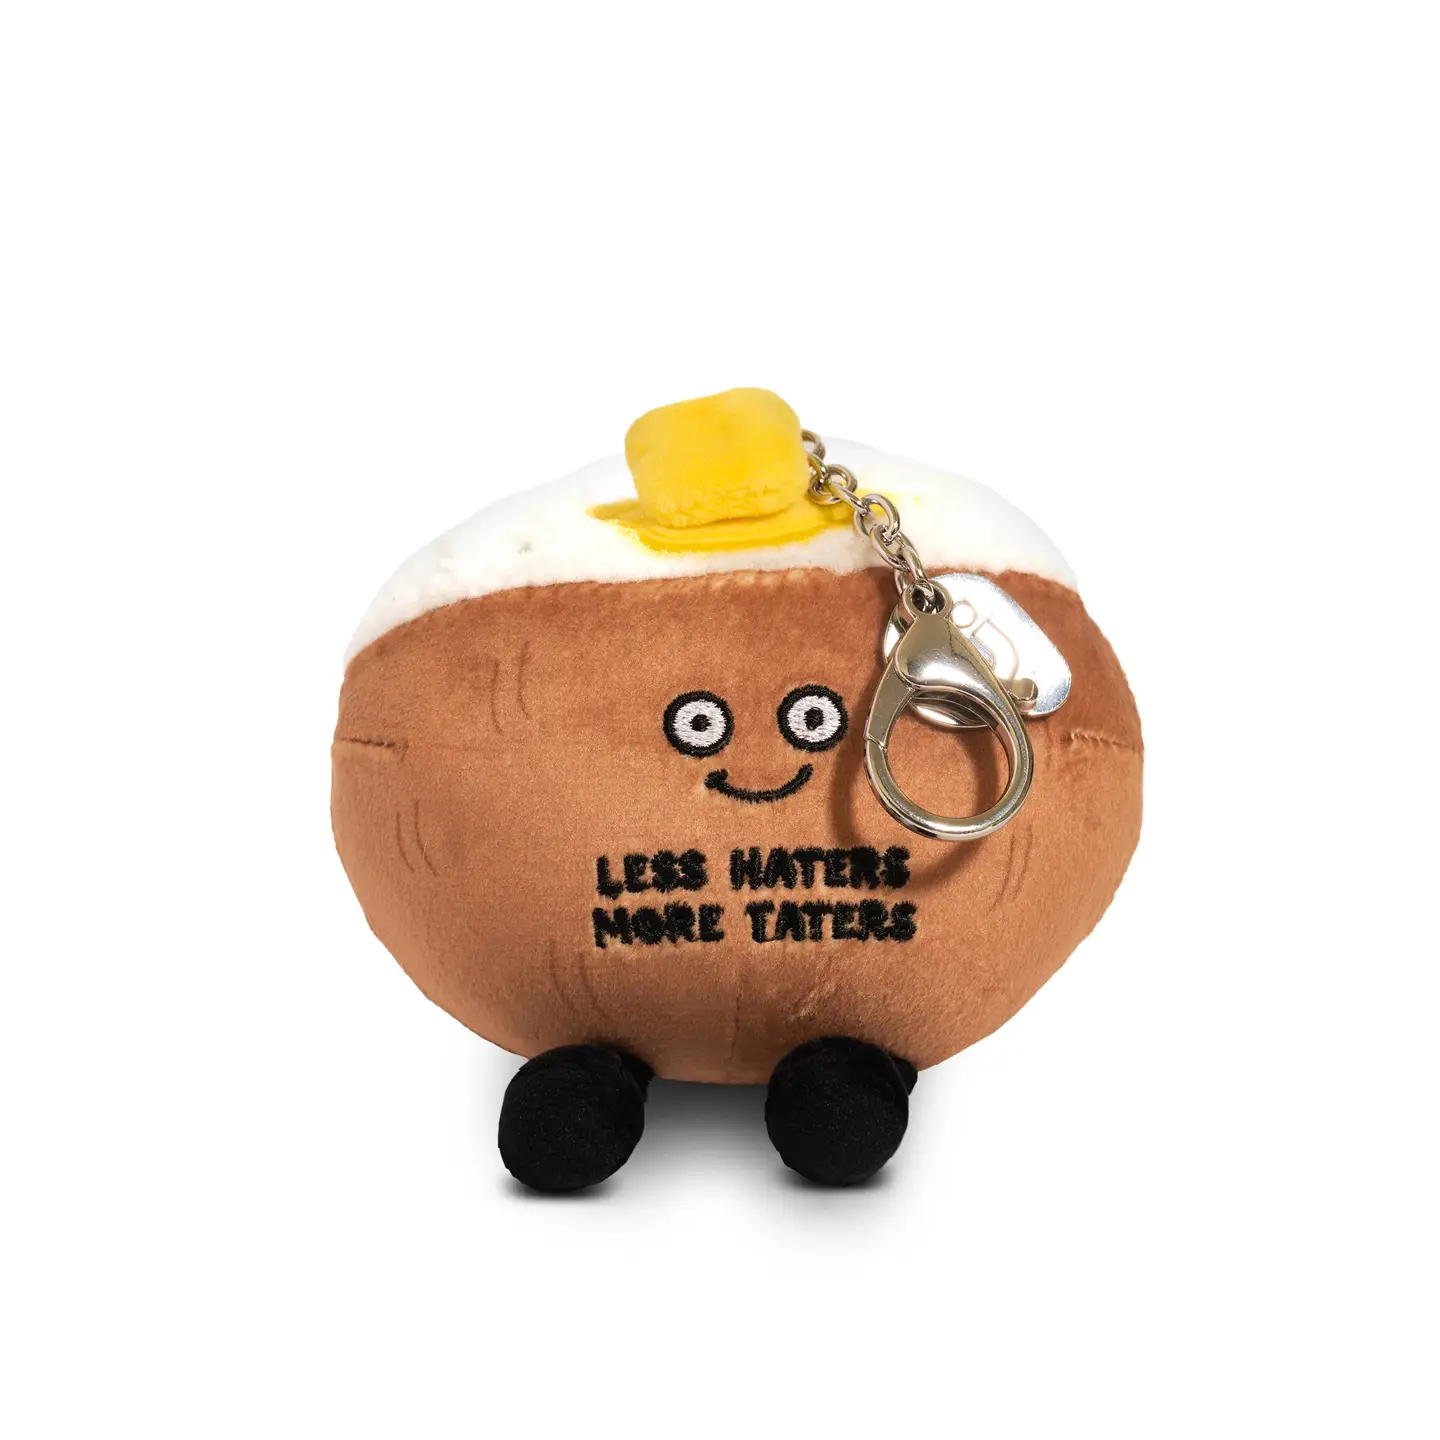 This little bag charm is a spud-tacular cheerleader. His supportive attitude makes him an ap-peel-ing accessory. With this tater, it’s all about the details. This charm’s fluffy tater top, small slab of butter, and tiny chive accents make him the perfect bite. He’d be a fun accessory for any bag or backpack.